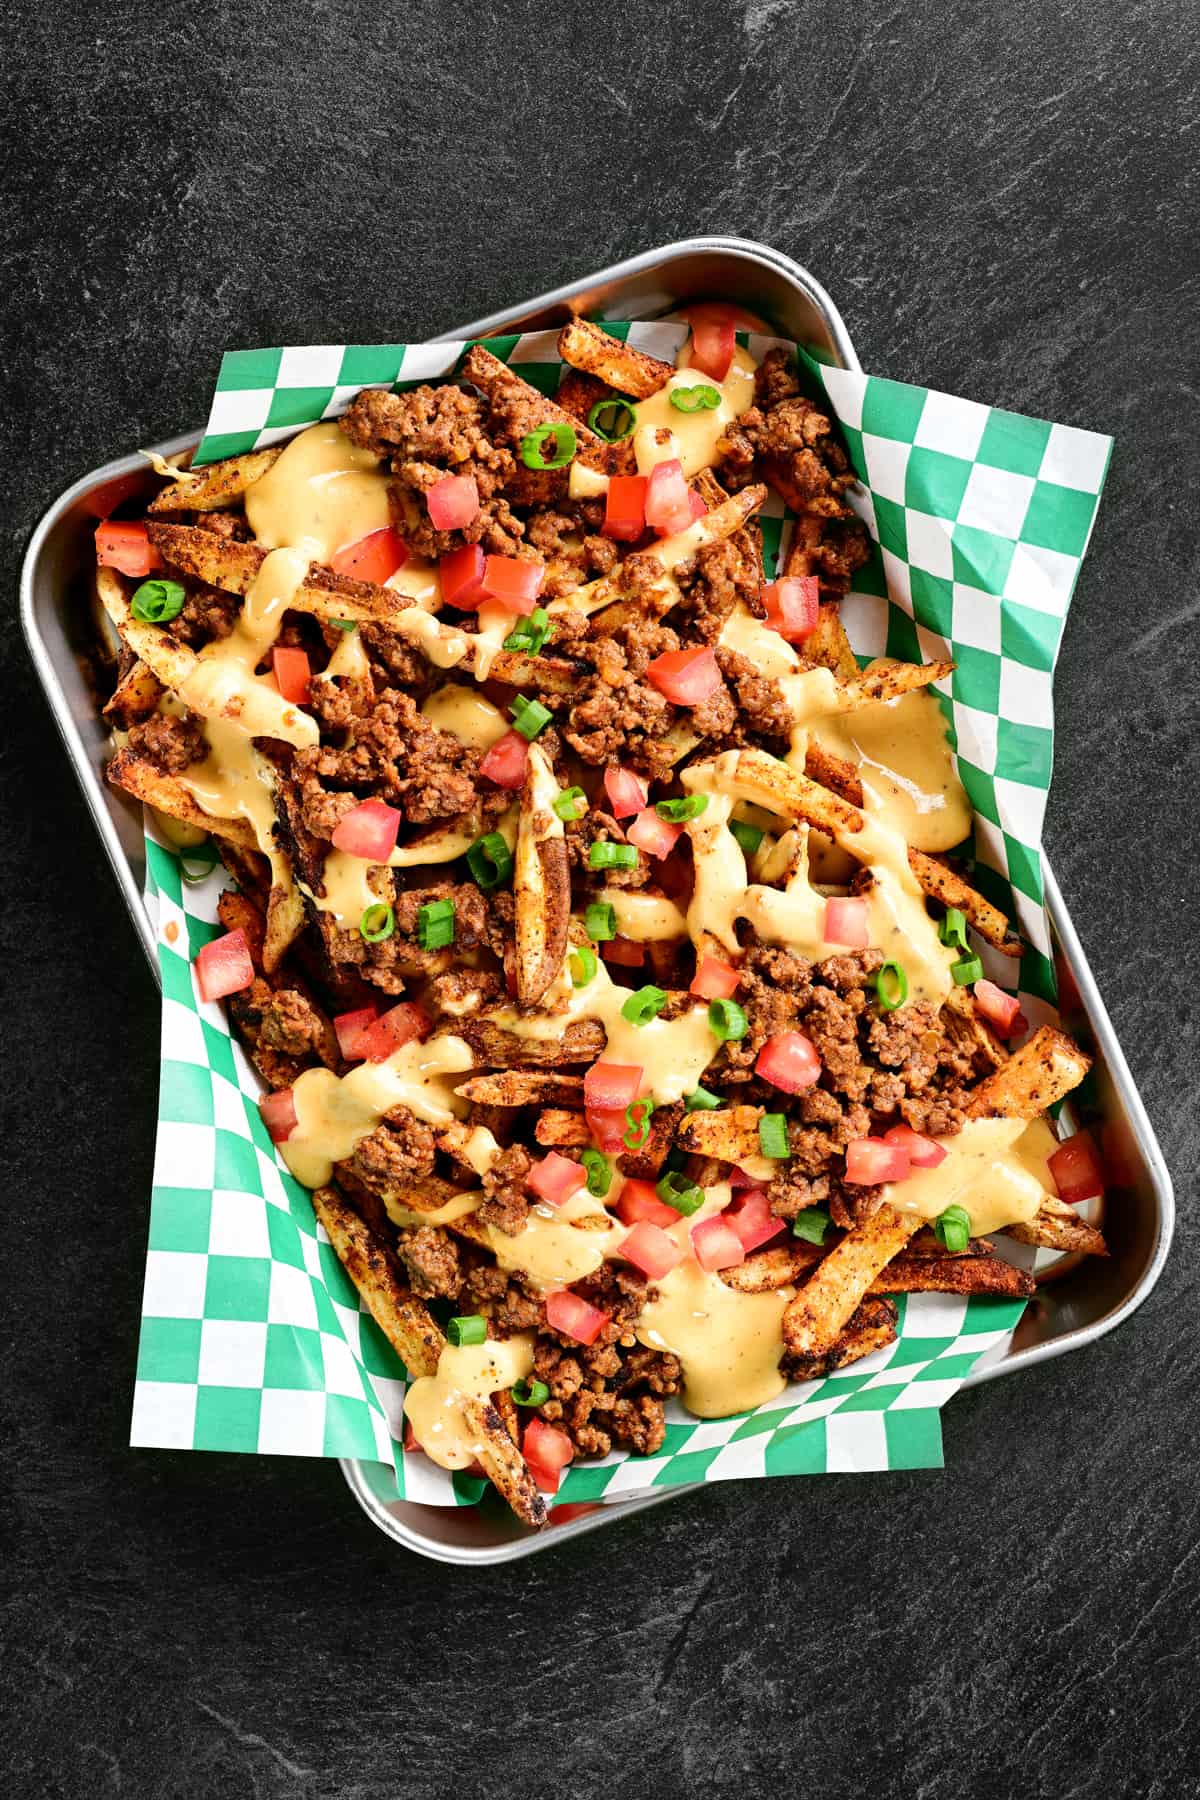 tray of loaded nacho fries with a green checked tray liner.